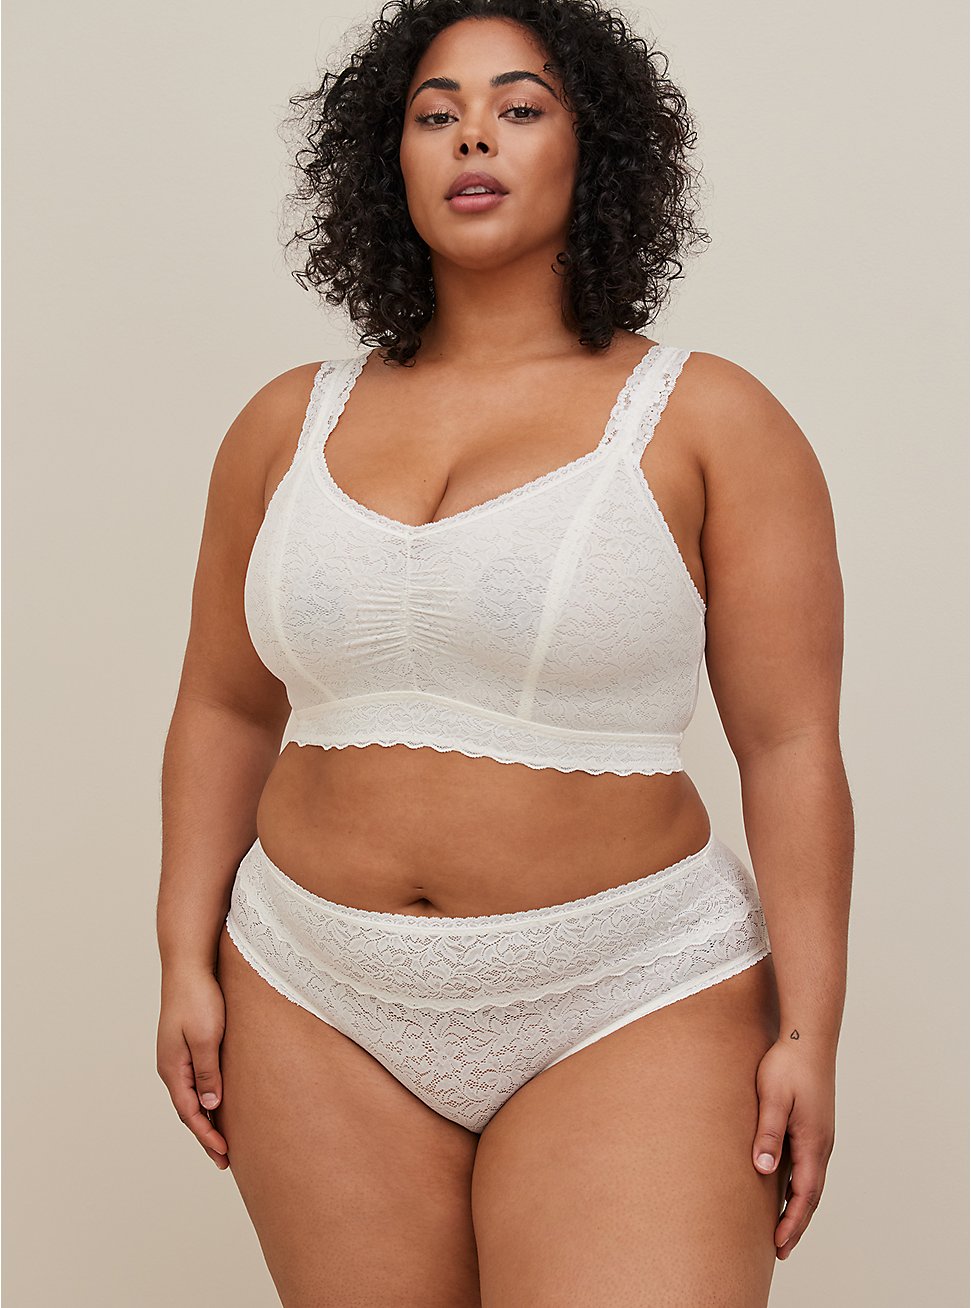 Plus Size Hipster Panty - 4-Way Stretch Lace White, CLOUD DANCER, hi-res